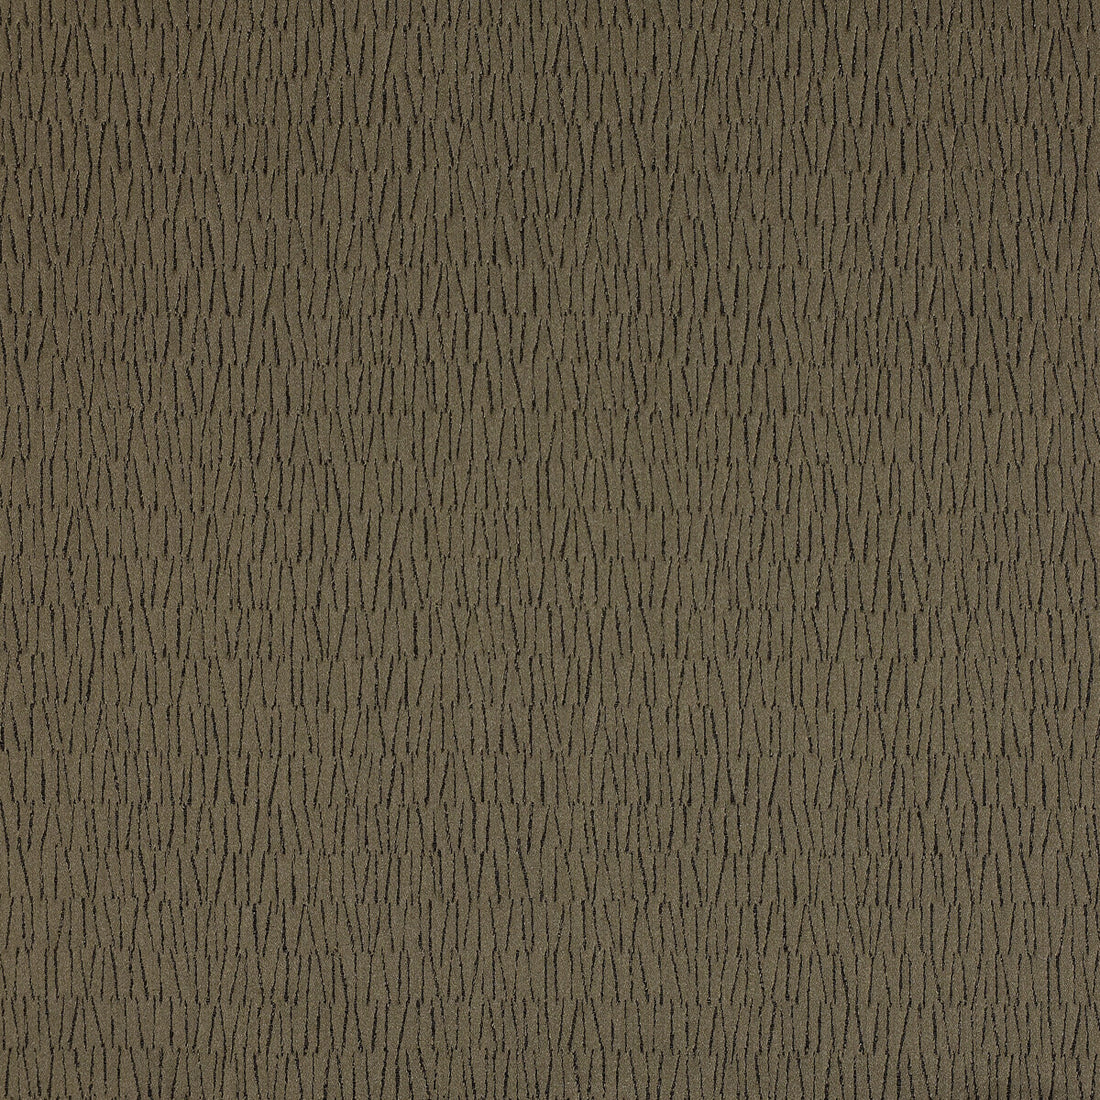 Earth fabric in 3 color - pattern LZ-30217.03.0 - by Kravet Design in the Lizzo collection